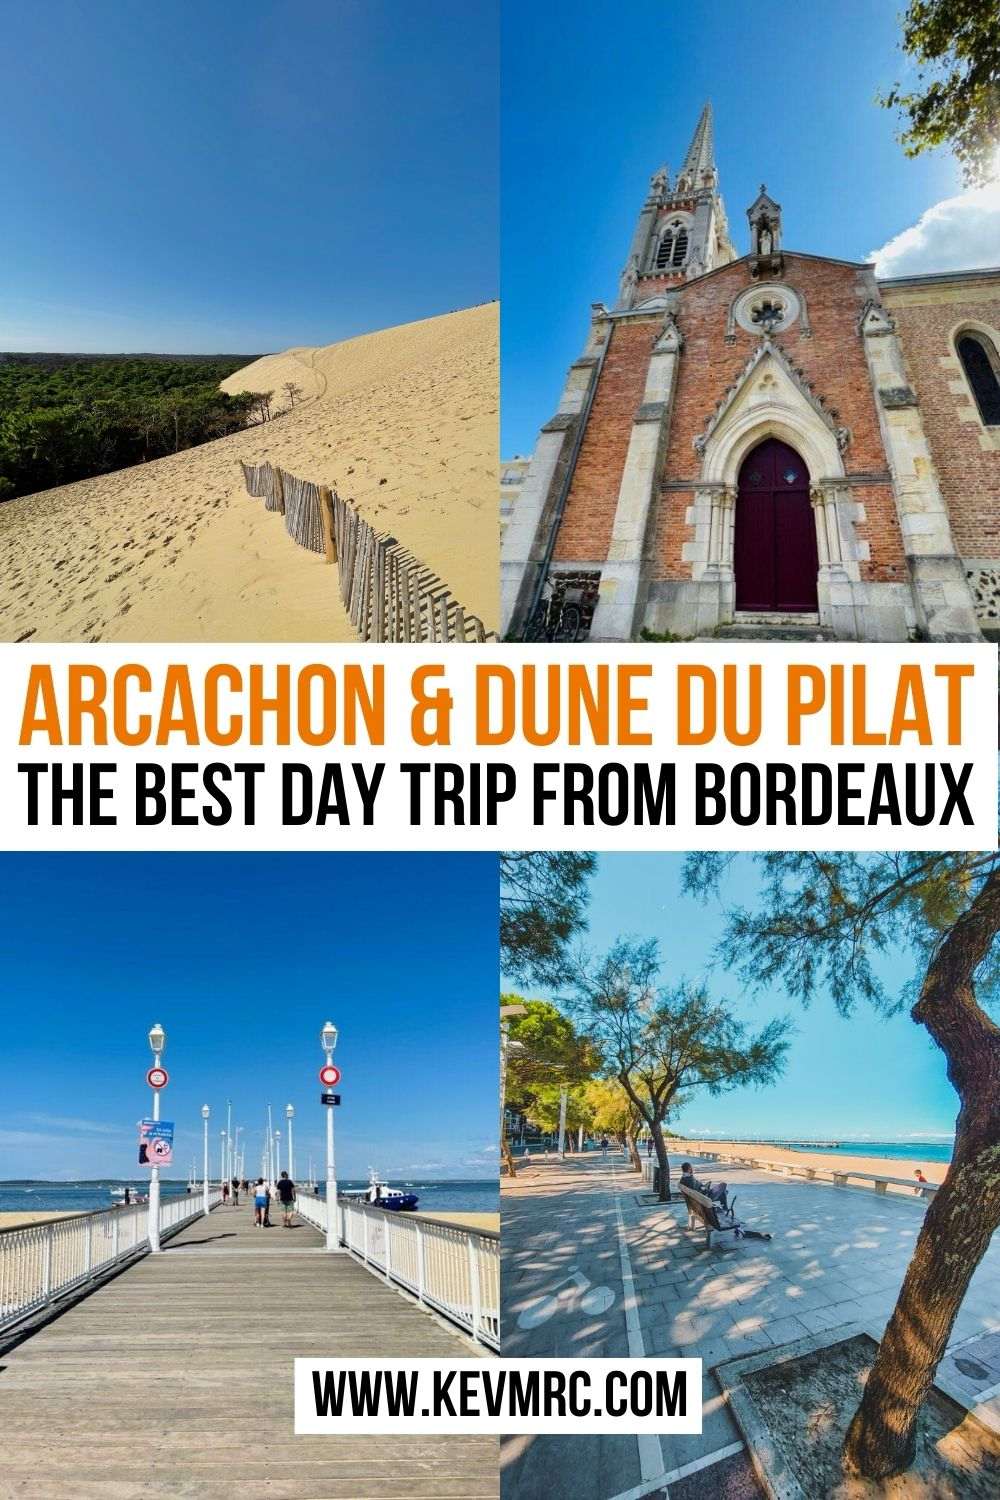 If you're in Bordeaux and want to do an excursion, here's the best day trip to Arcachon from Bordeaux, with a stop at the Dune de Pilat. bassin arcachon | dune du pyla | bordeaux travel guide | day trip from bordeaux